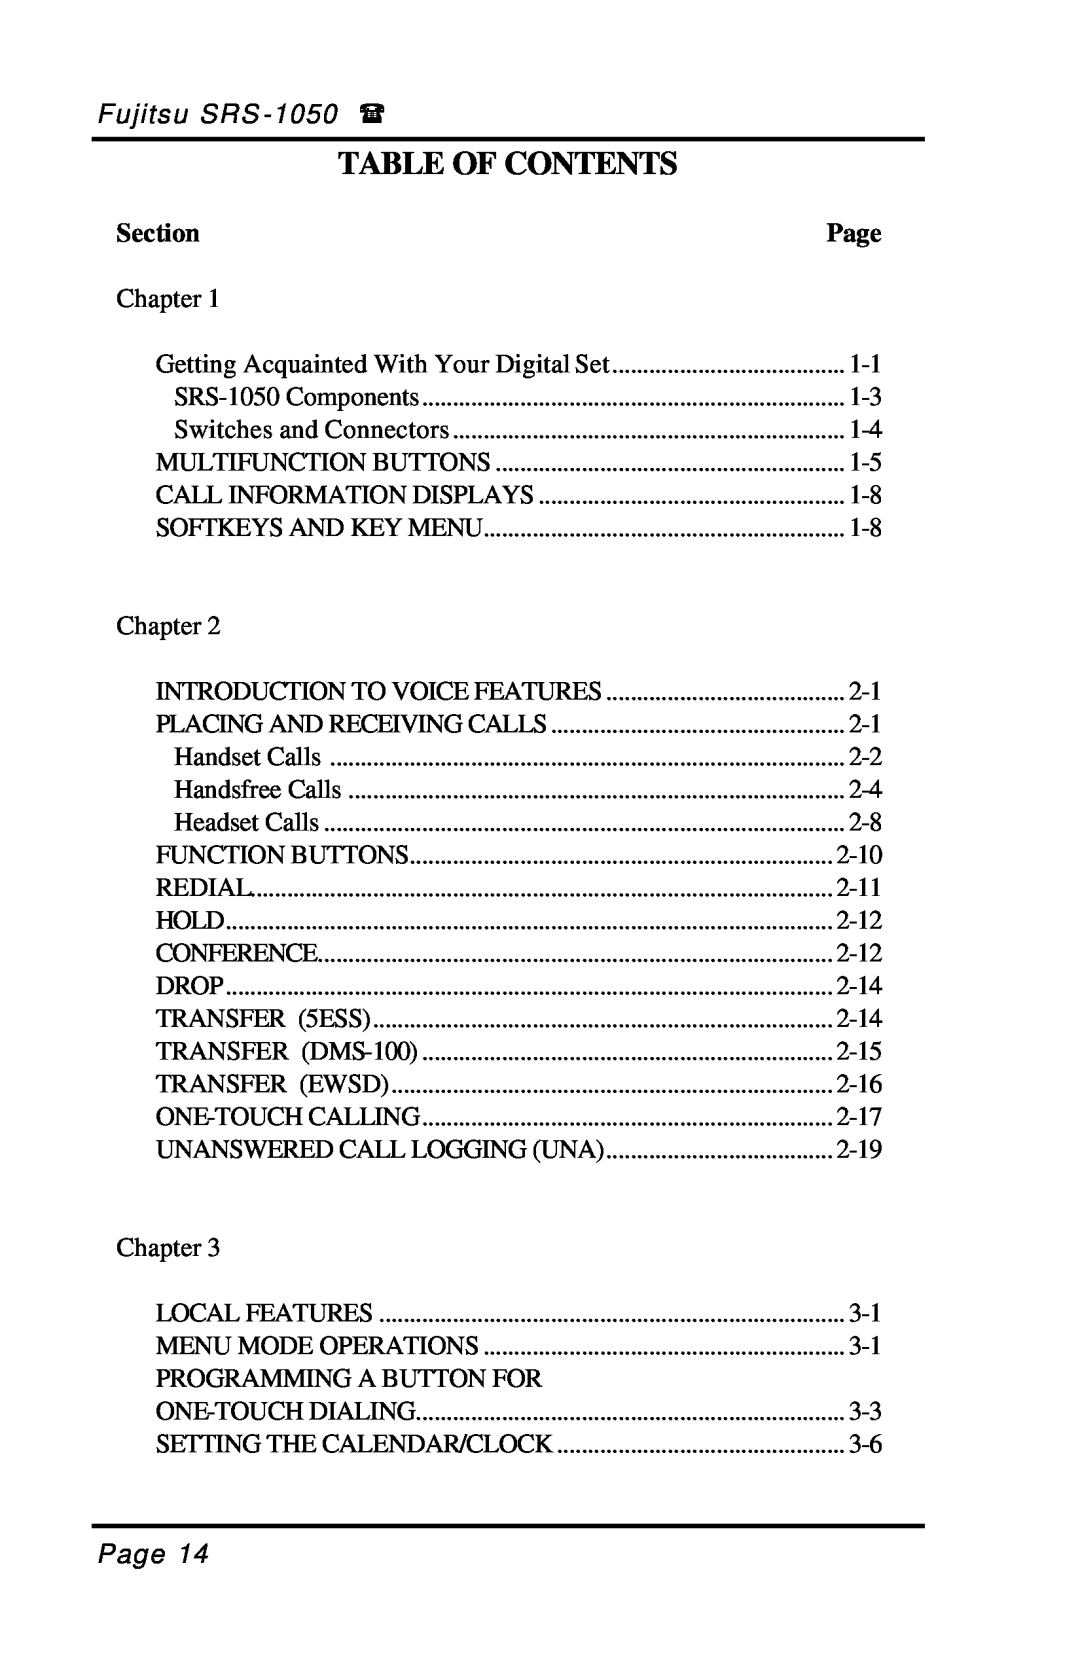 Fujitsu SRS-1050 manual Table Of Contents, Section, Page 